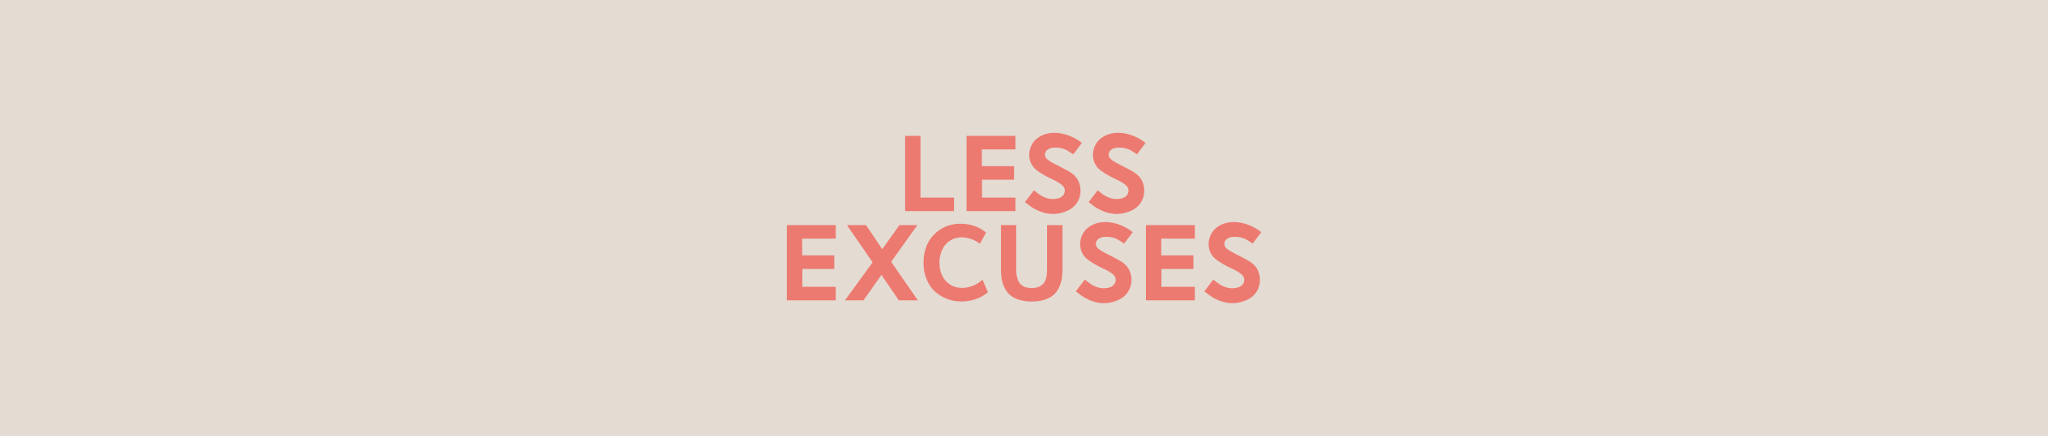 Less Excuses